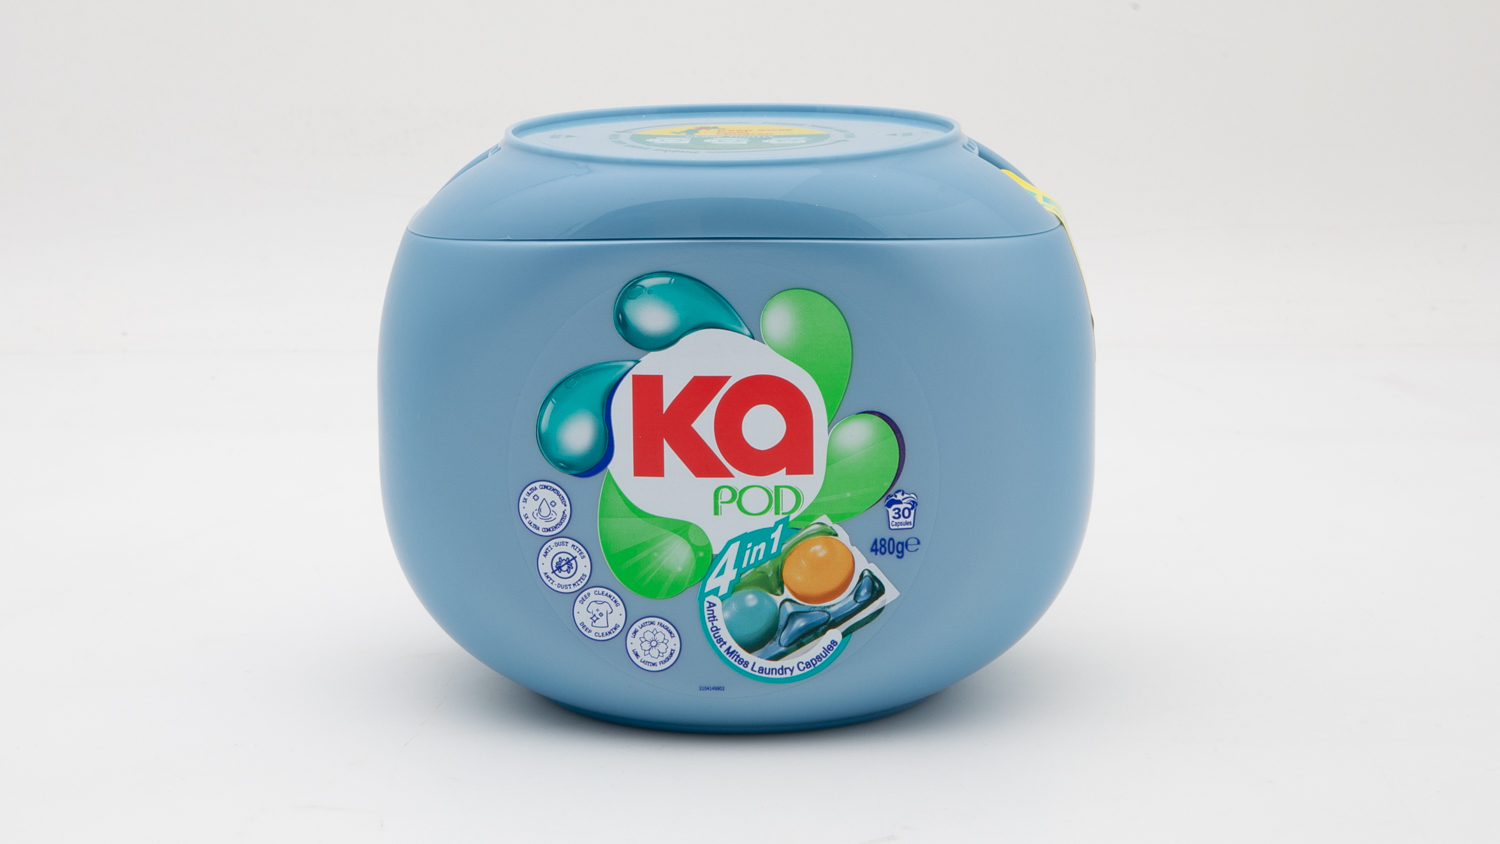 Ka Pod 4 in 1 Anti-dust Mites Laundry Capsules 30 Capsules 480g Front Loader carousel image